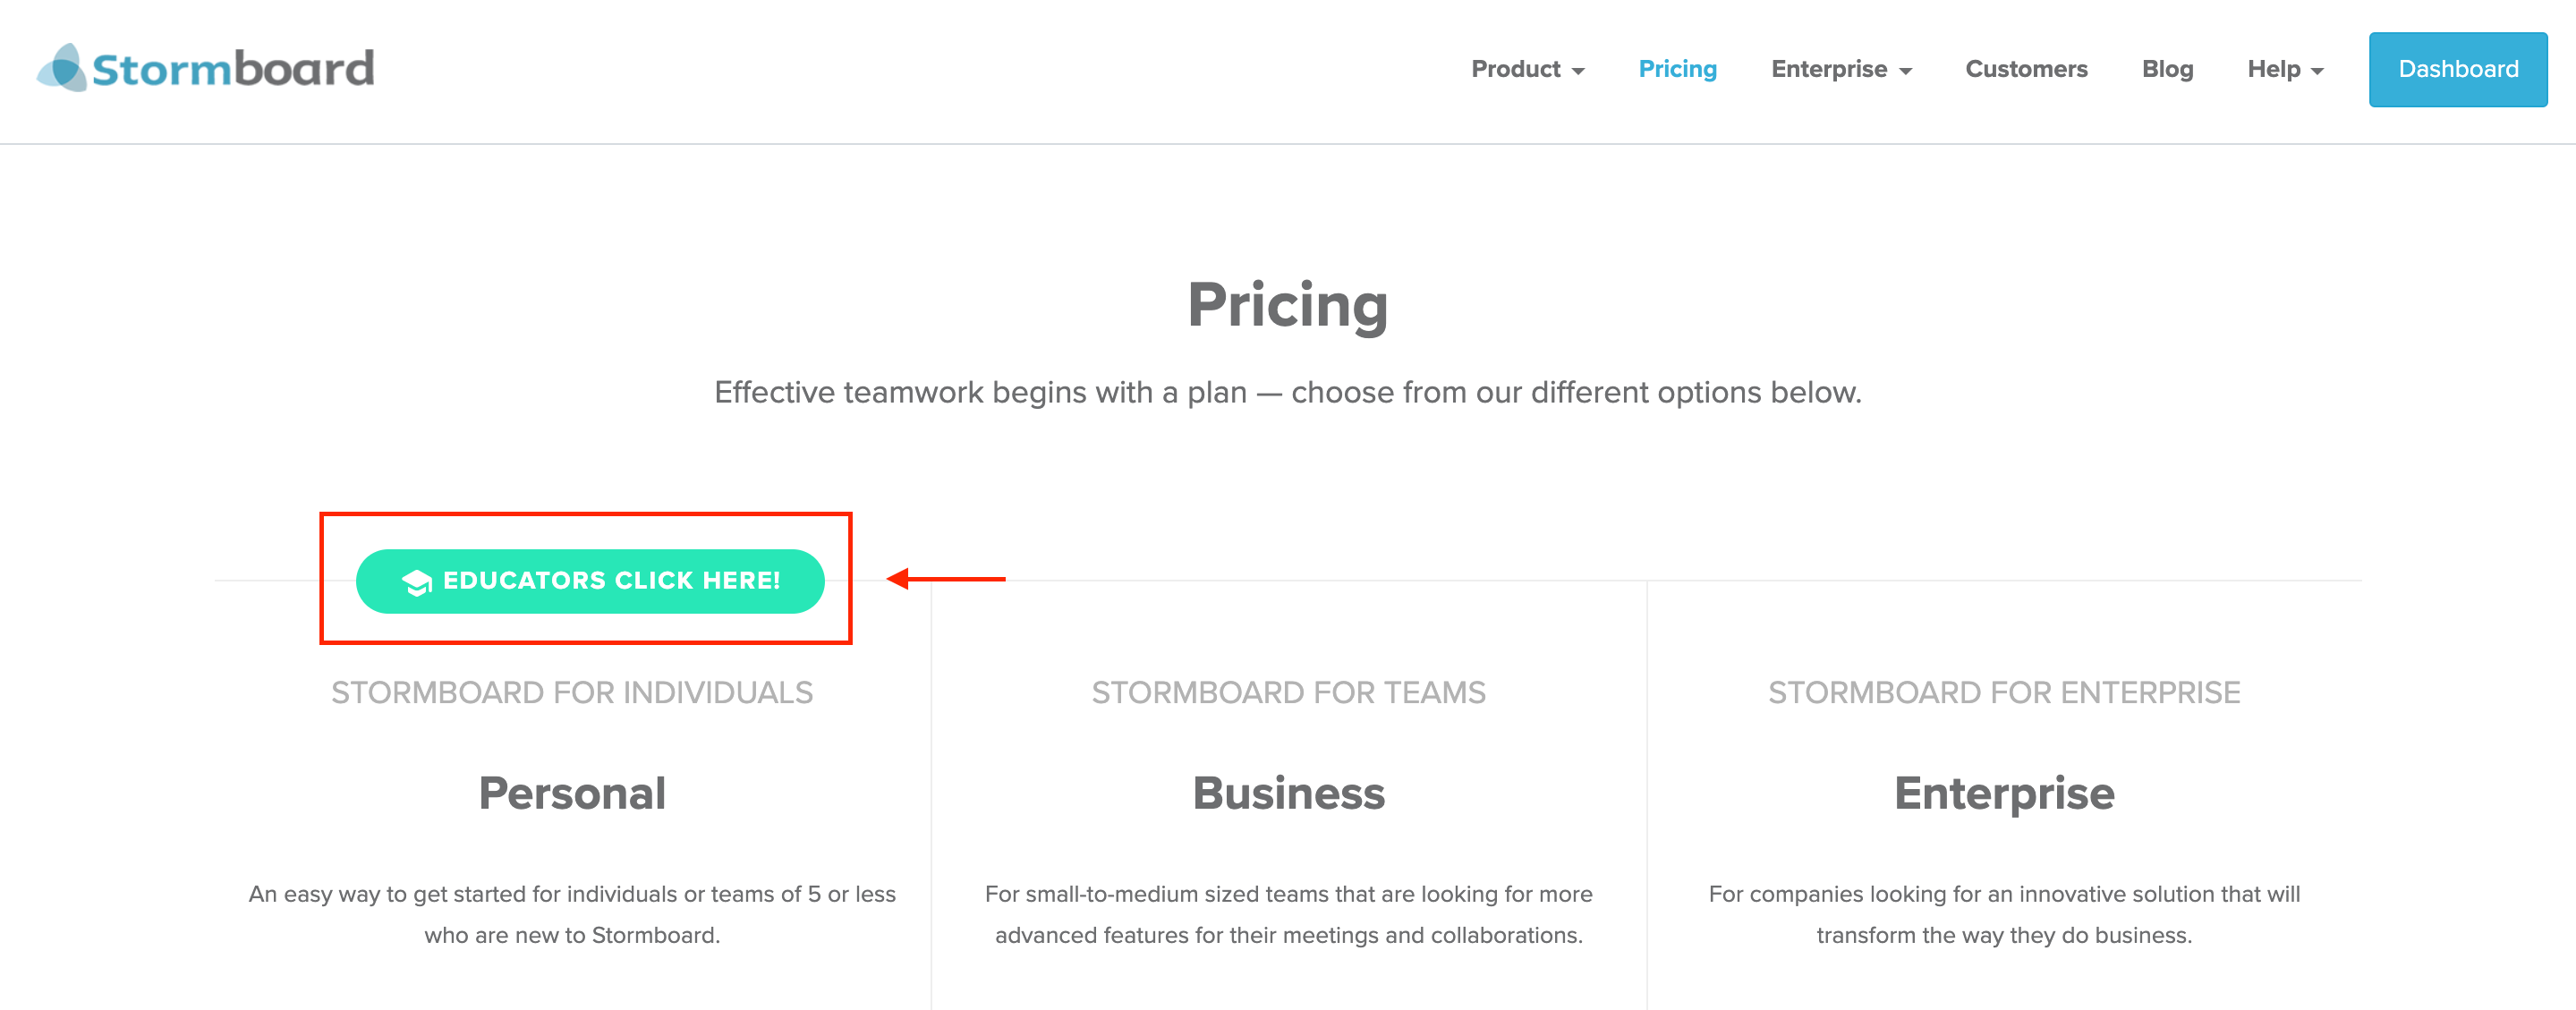 Stormboard Pricing page options